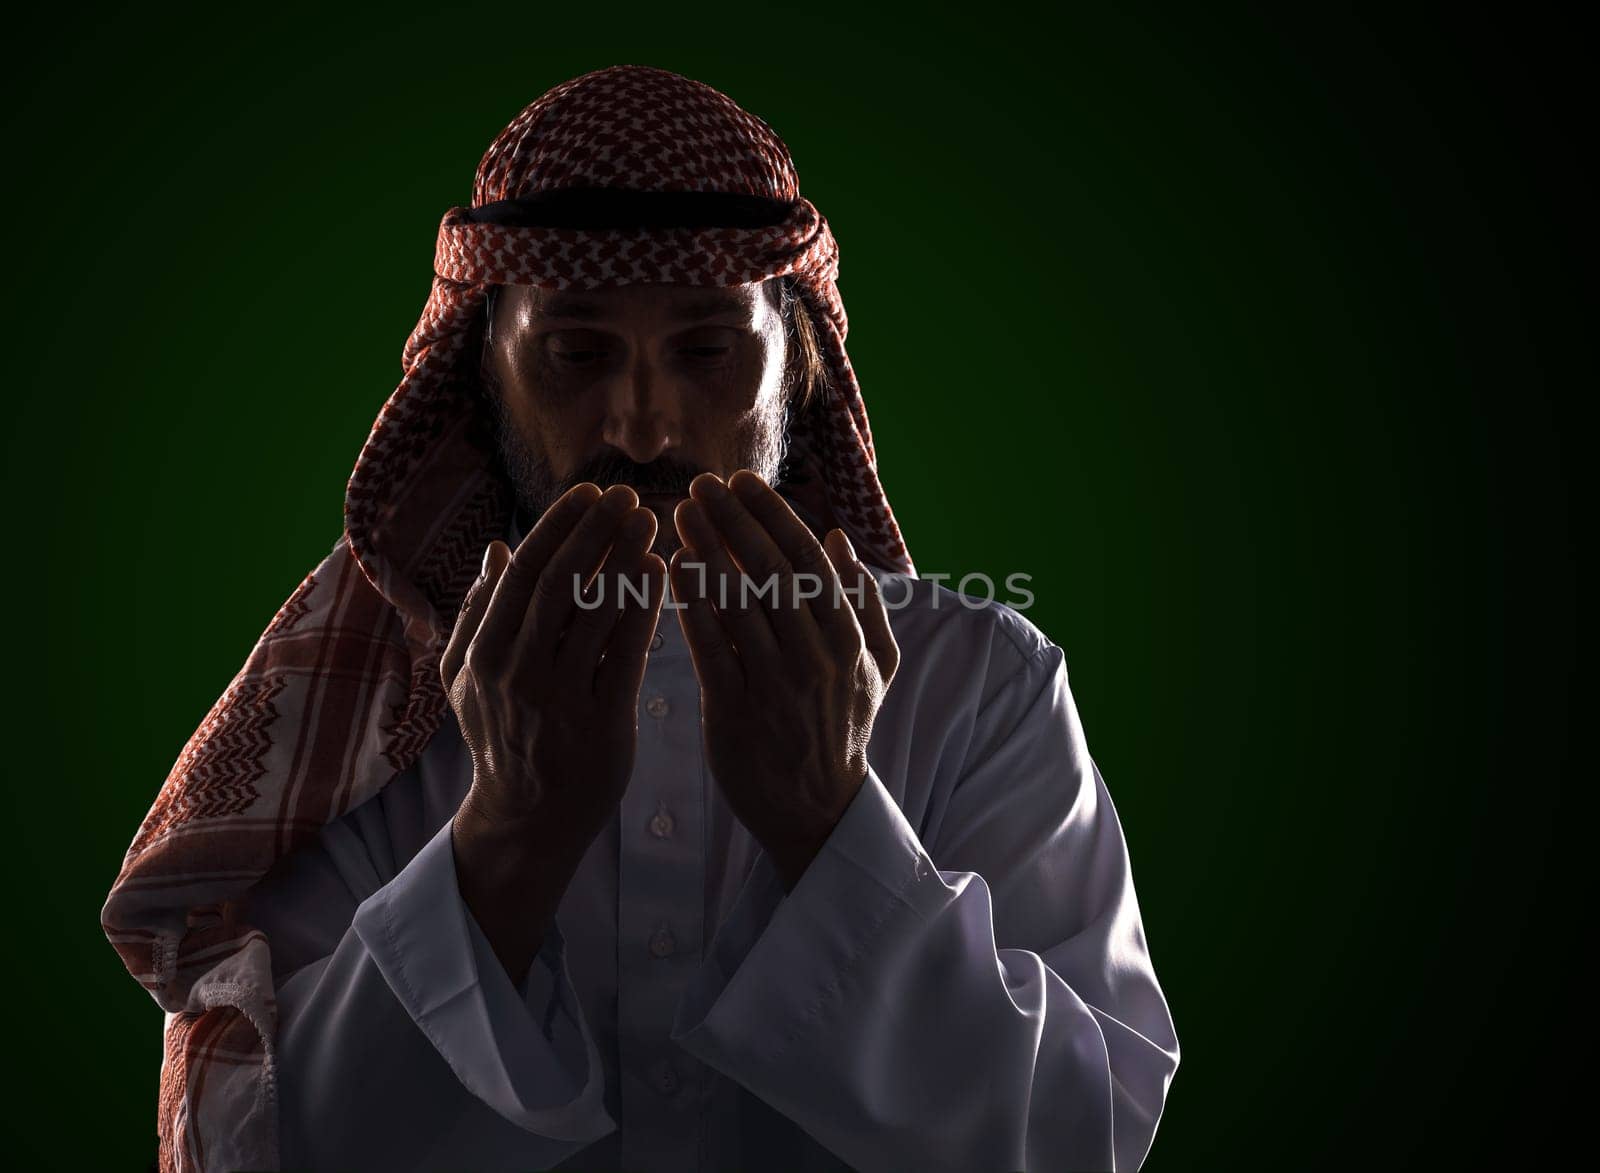 Arab man in prayer with his palms in front of his face. It conveys the devotion and spirituality inherent in Islamic culture. High quality photo